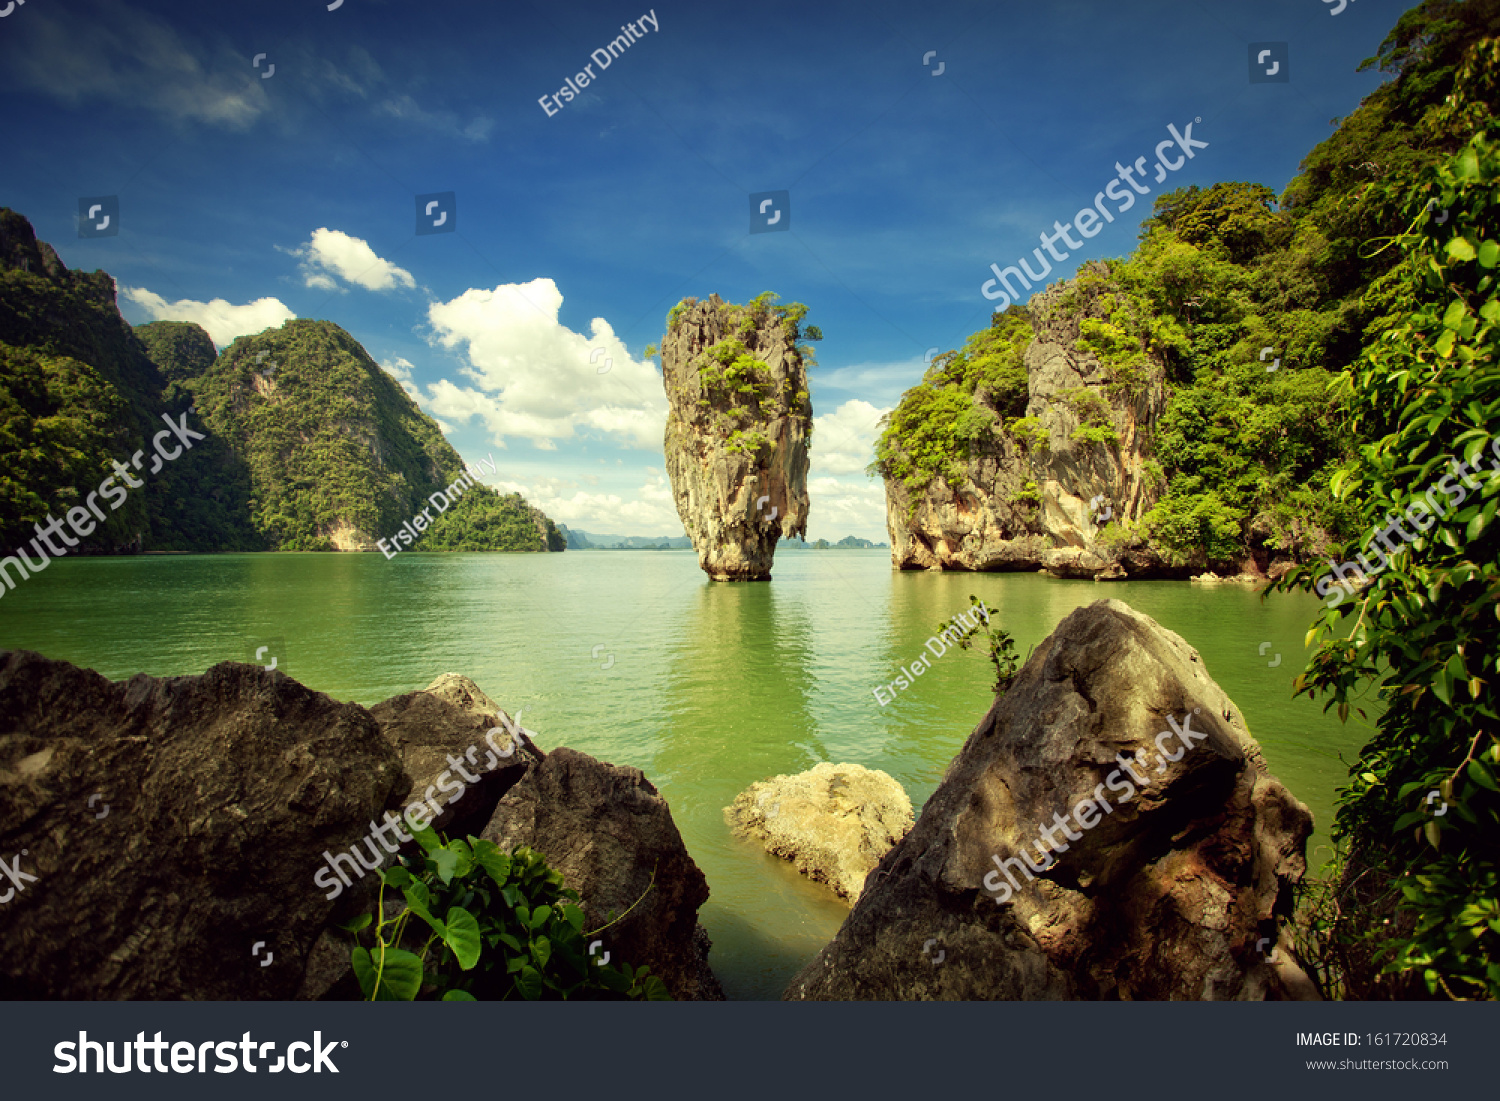 View of nice tropical  island  in summer environment   #161720834